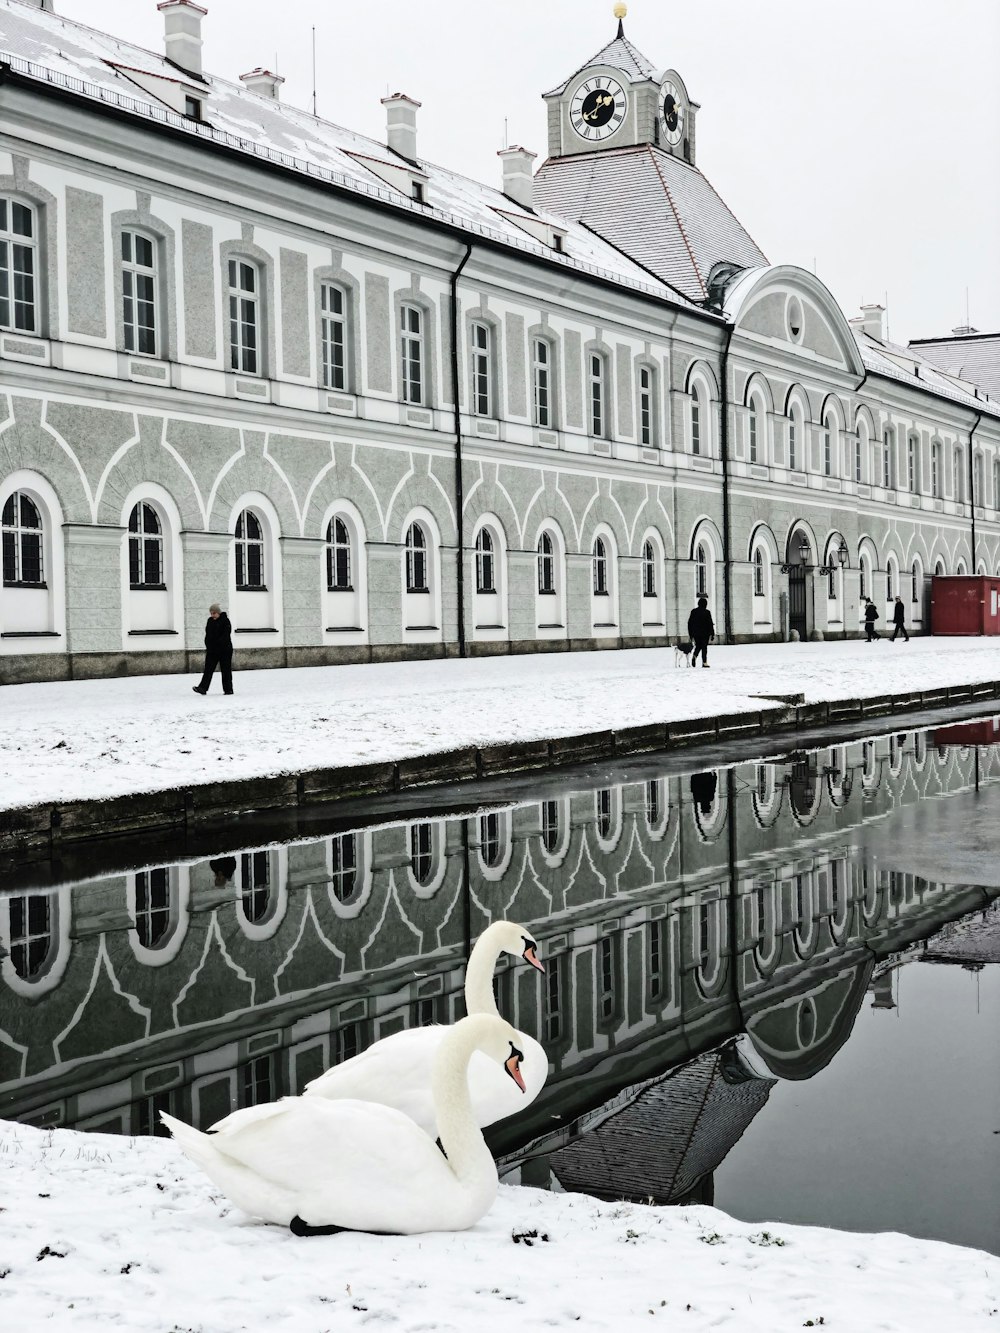 two white swans across body of water